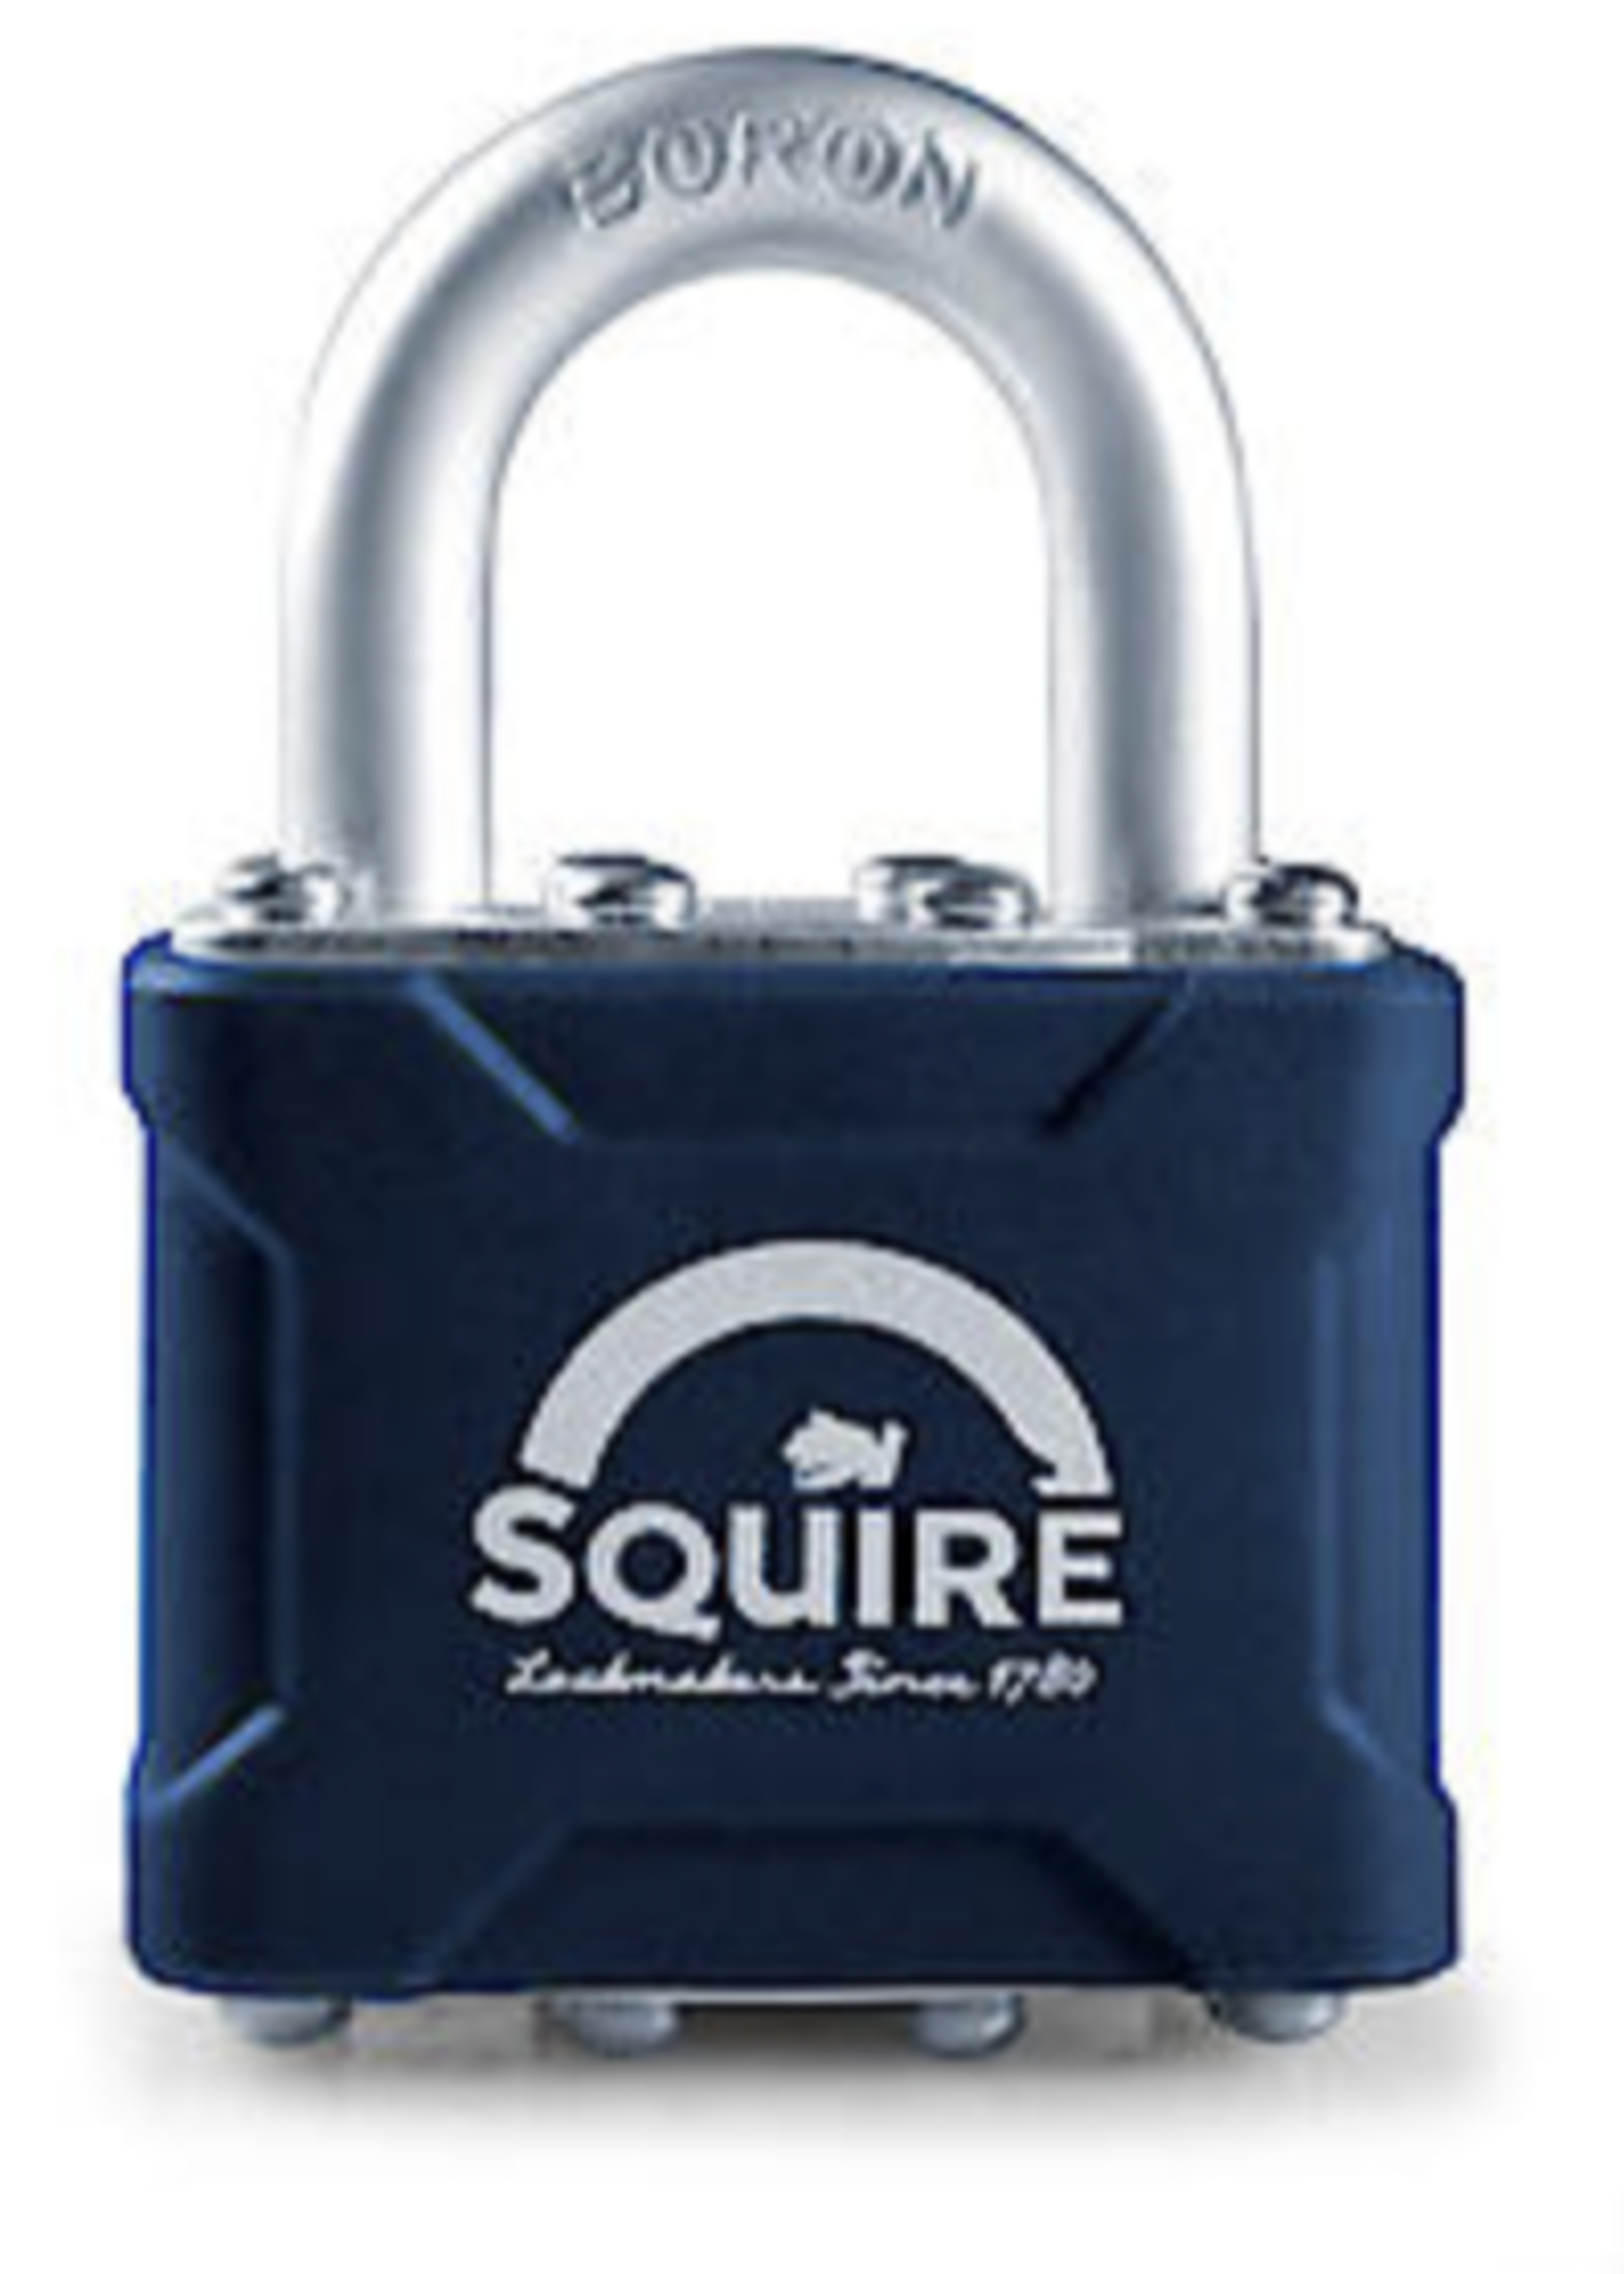 Squire Squire Stronglock 4-pin Tumbler padlock no 35